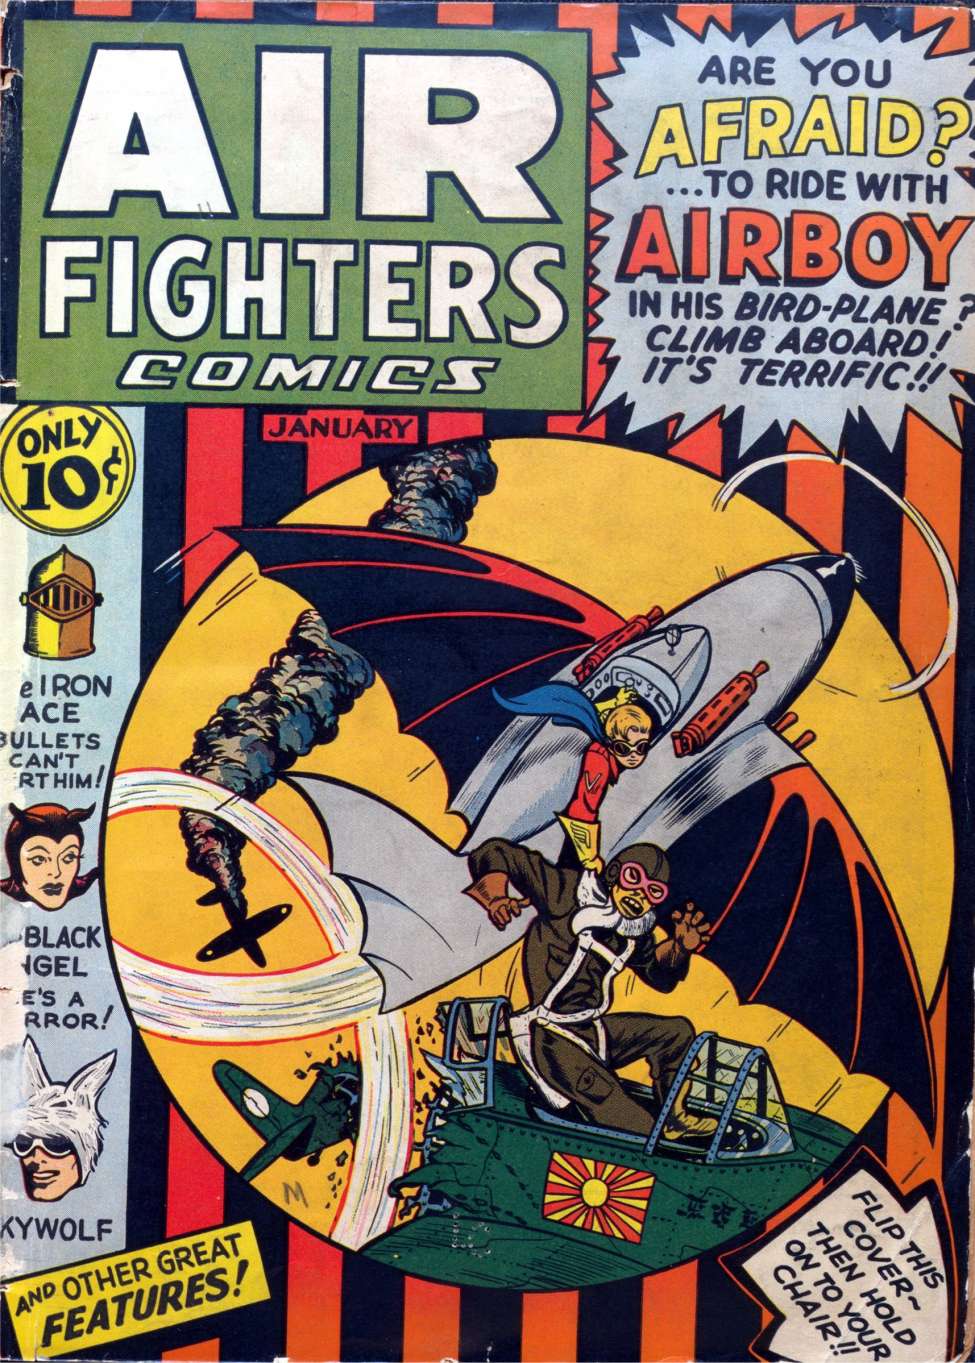 Book Cover For Air Fighters Comics v1 4 (alt) - Version 2